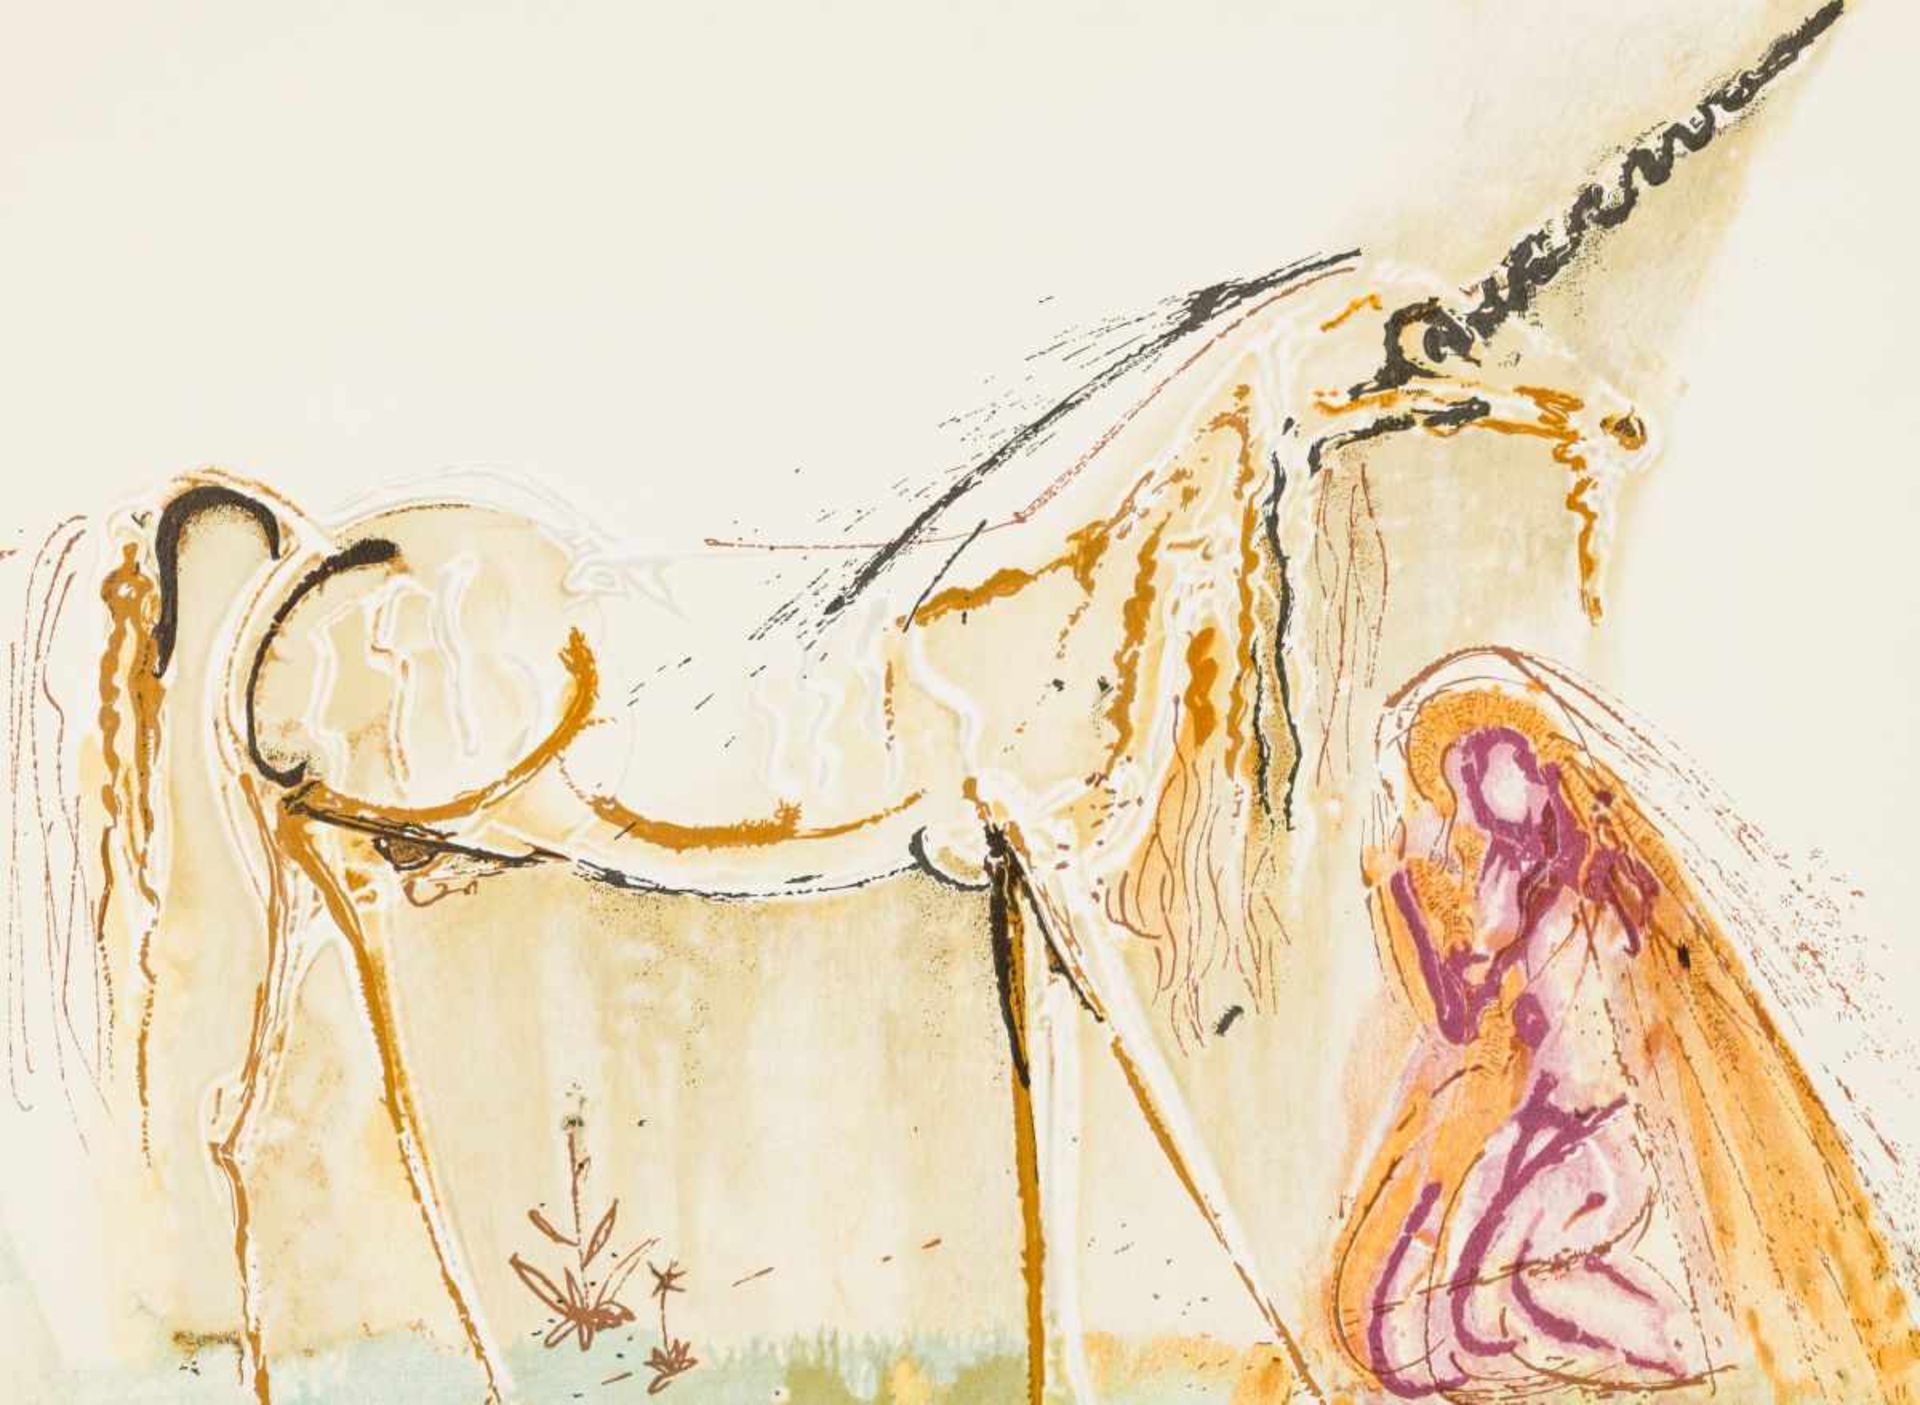 Dalí, SalvadorUnicornColored Lithographsigned lower right, marked as Test Print with E.A. lower